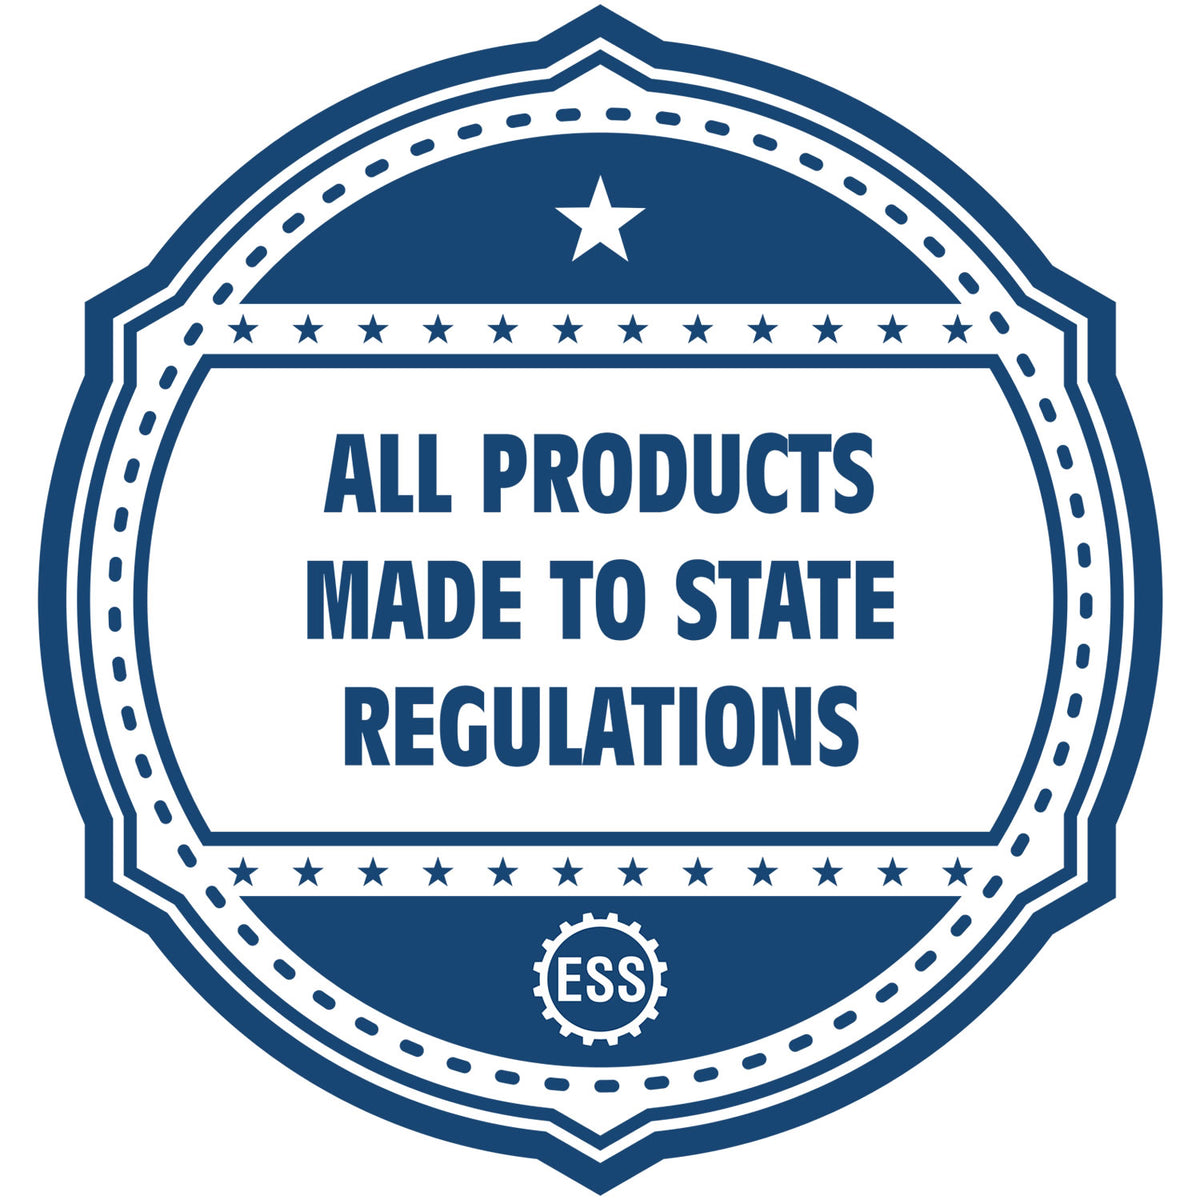 An icon or badge element for the Slim Pre-Inked Virginia Land Surveyor Seal Stamp showing that this product is made in compliance with state regulations.